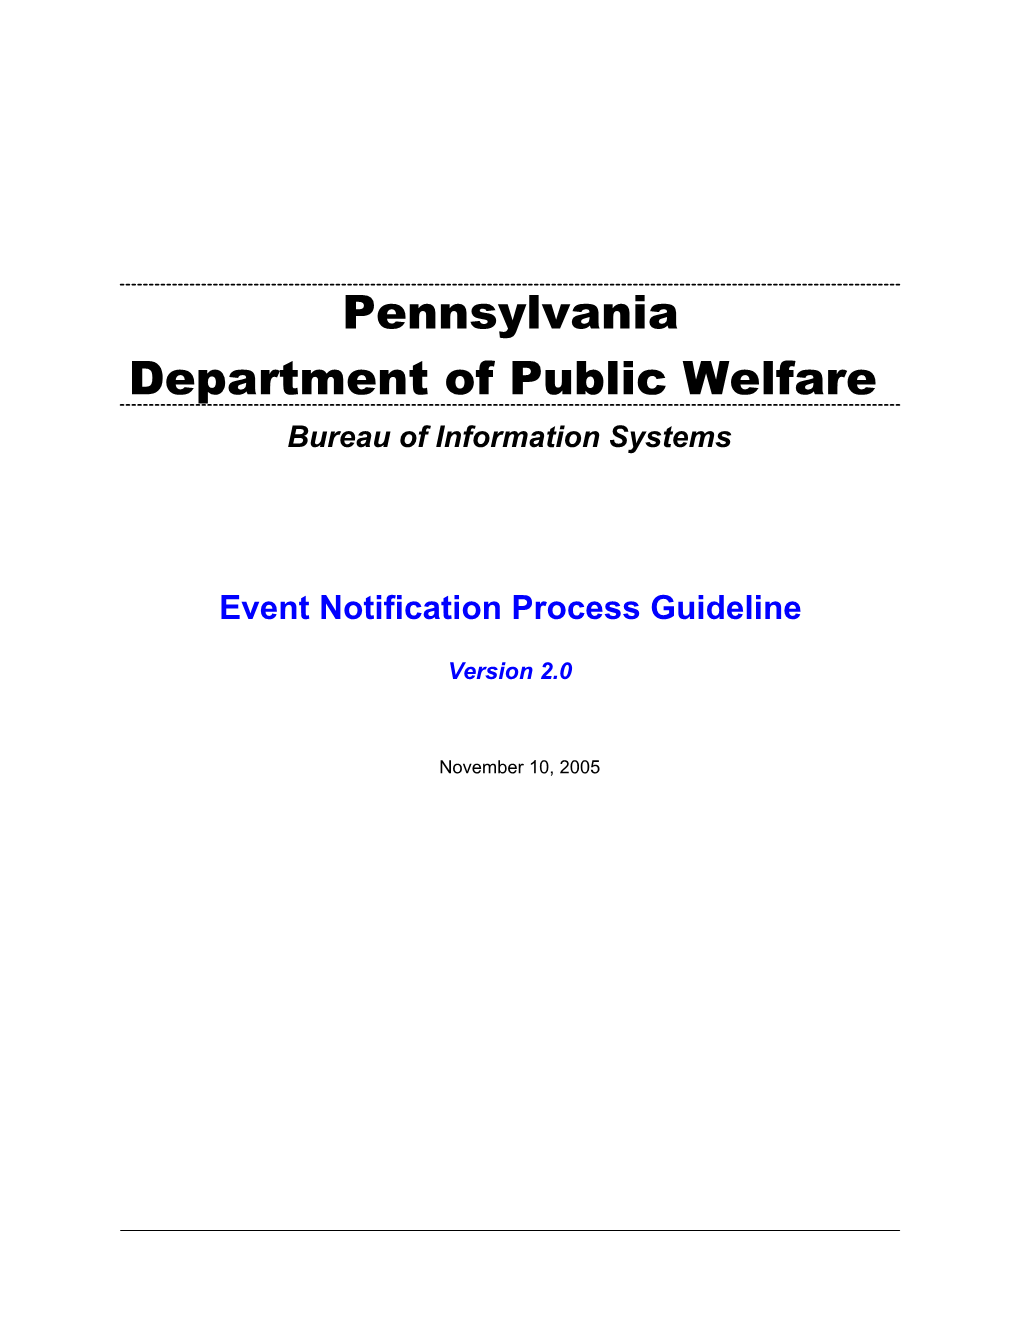 Event Notification Guideline